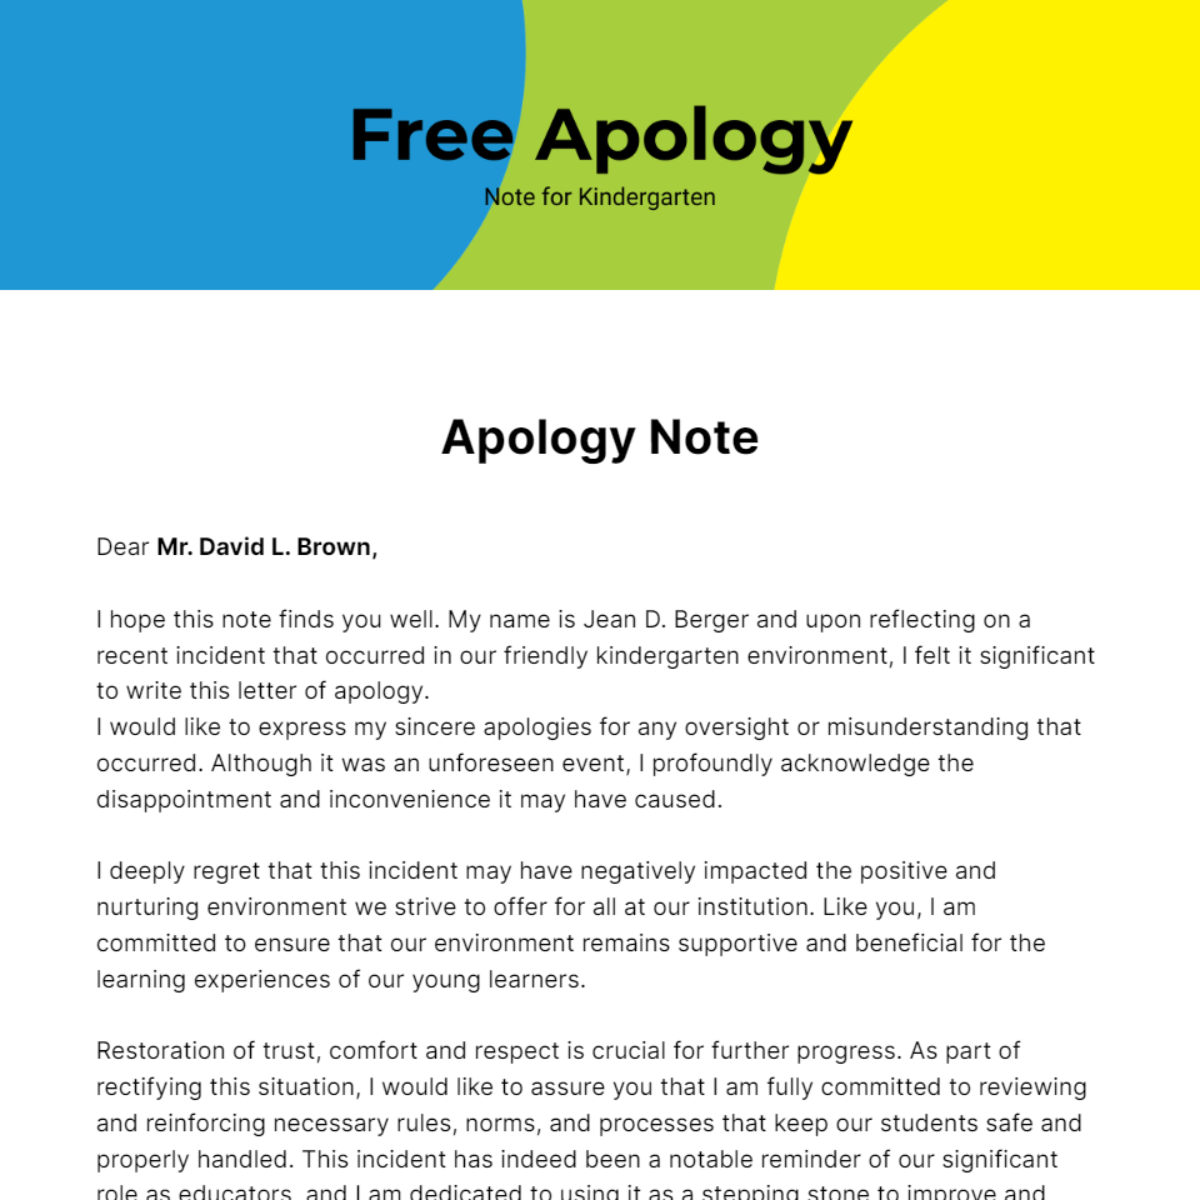 Free Apology Note for Kindergarten Template